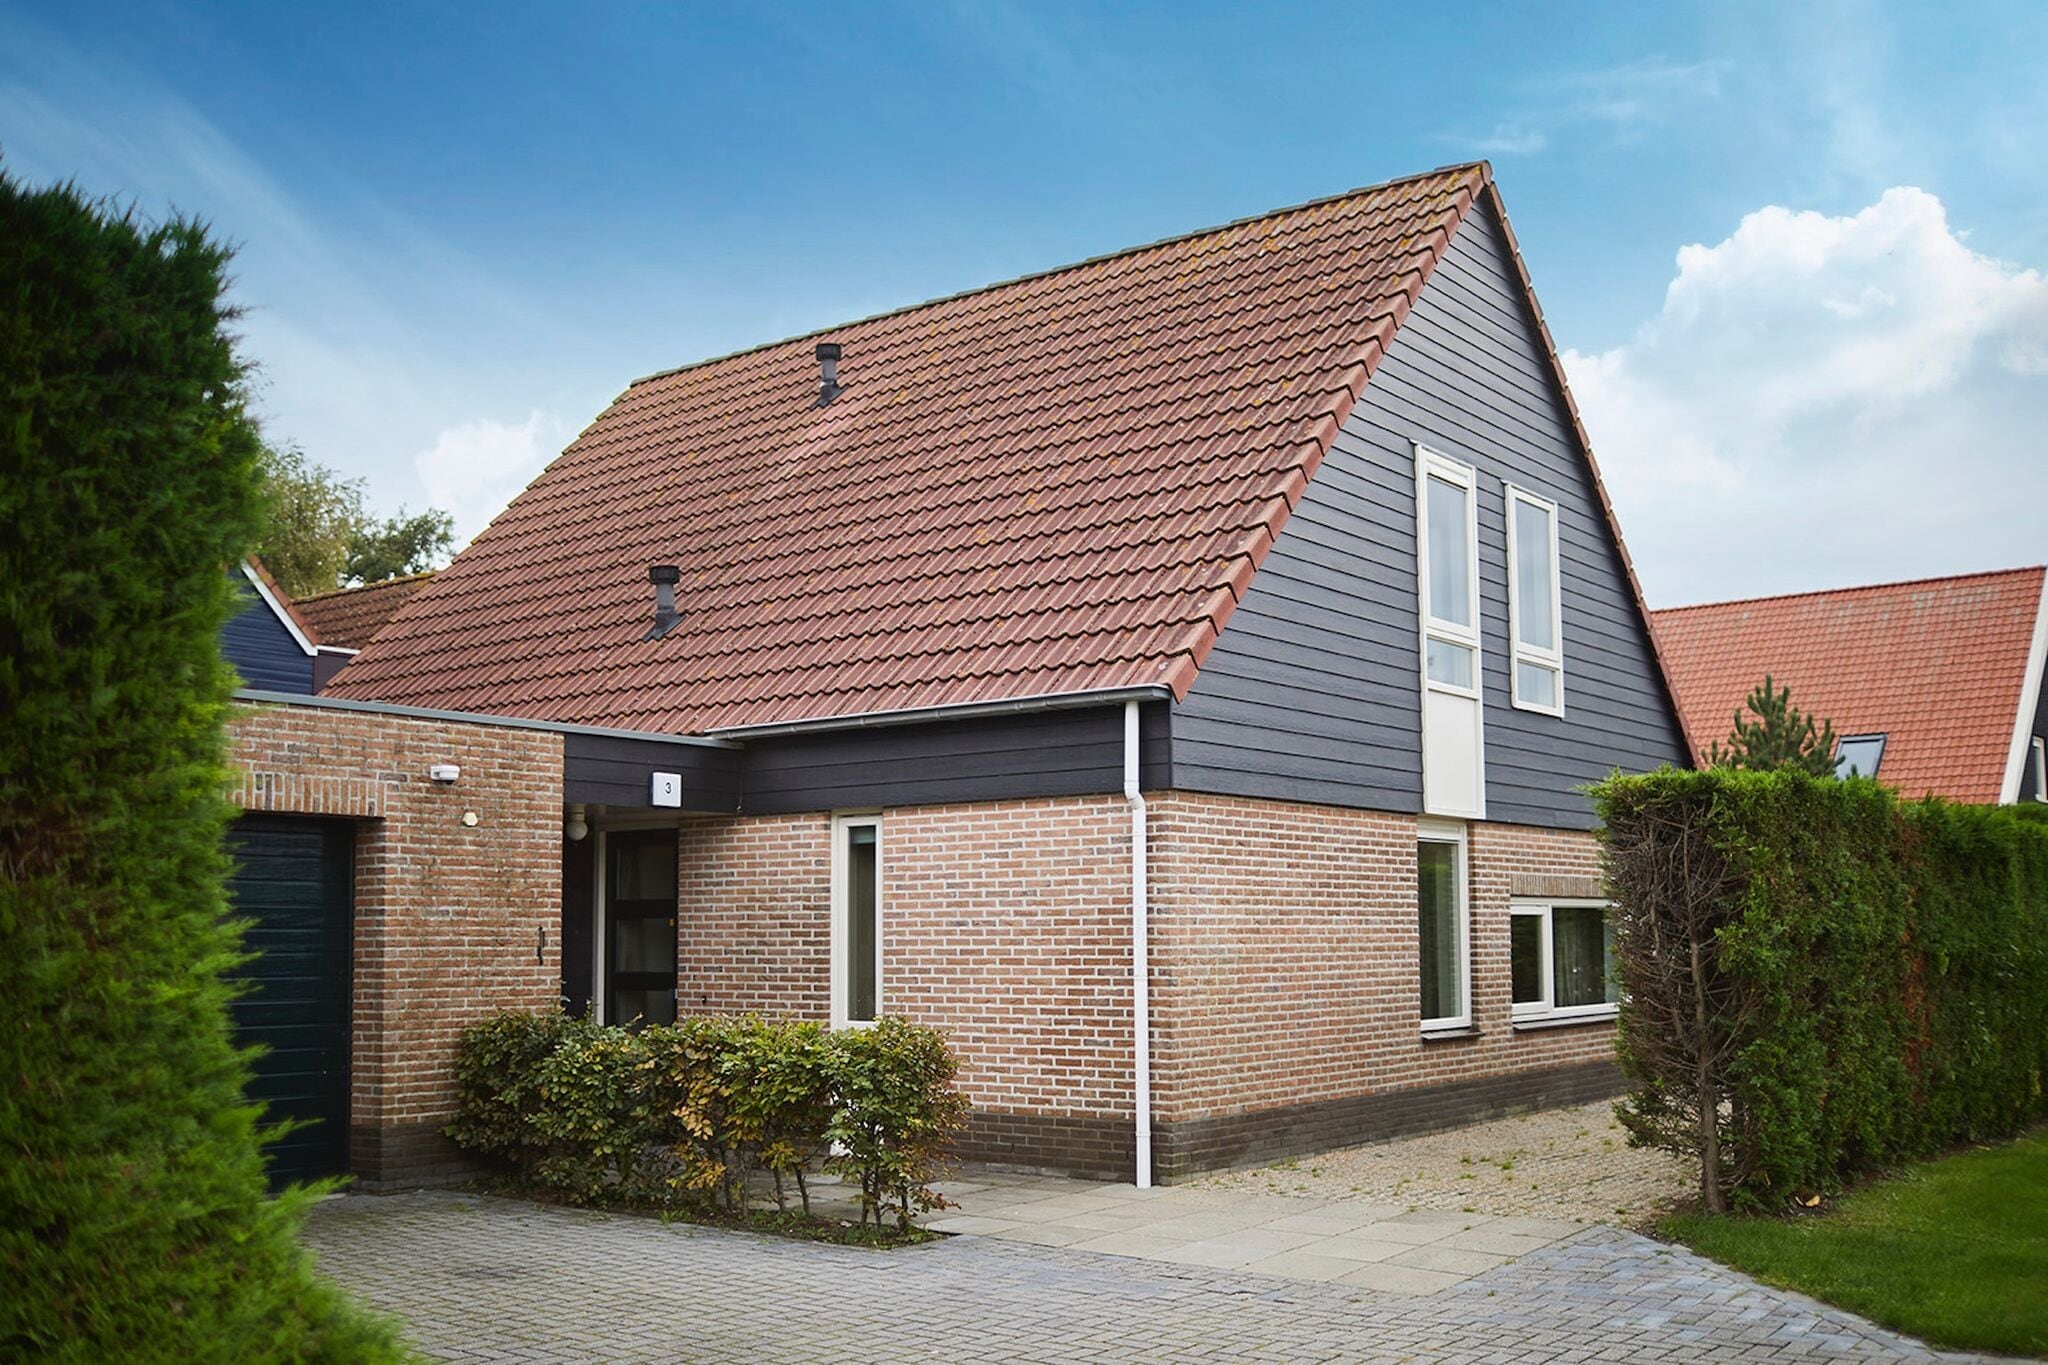 Beautiful group accommodation, located in Zeeland